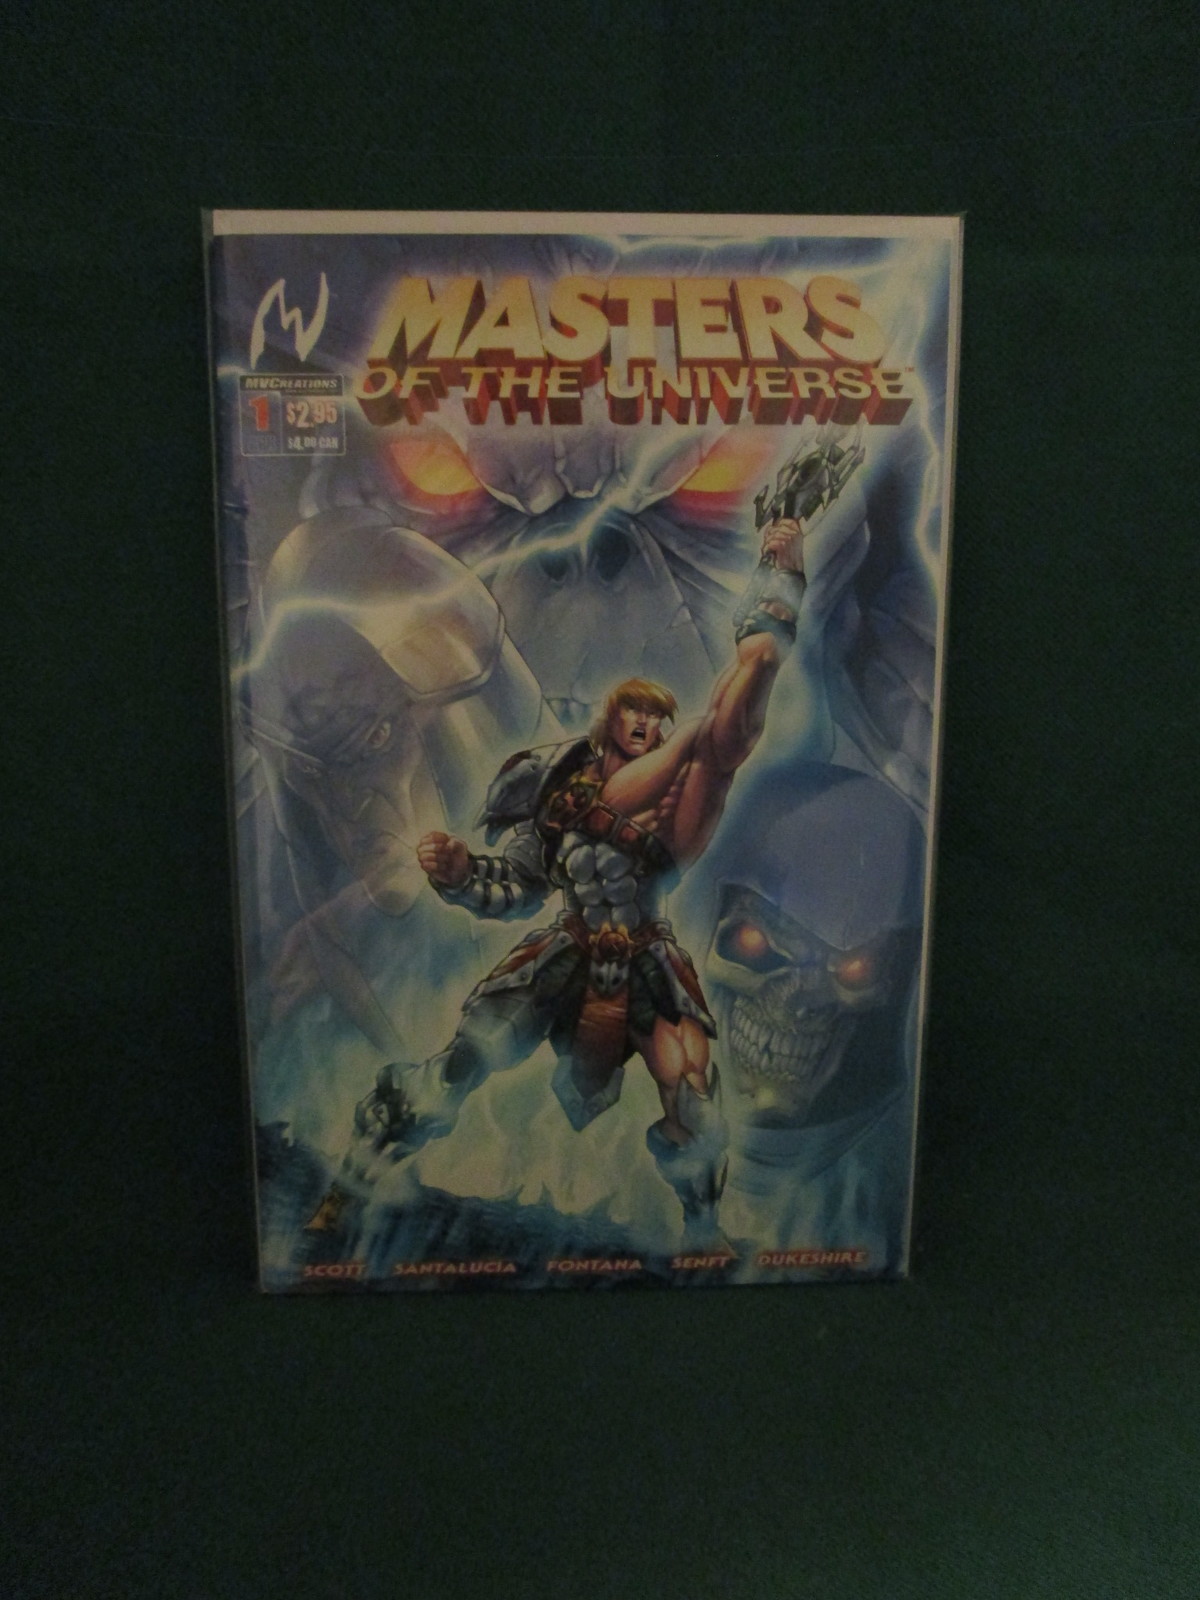 Primary image for 2004 Mvcreations - Masters Of The Universe  #1 - Standard Edition 1st Print  8.0